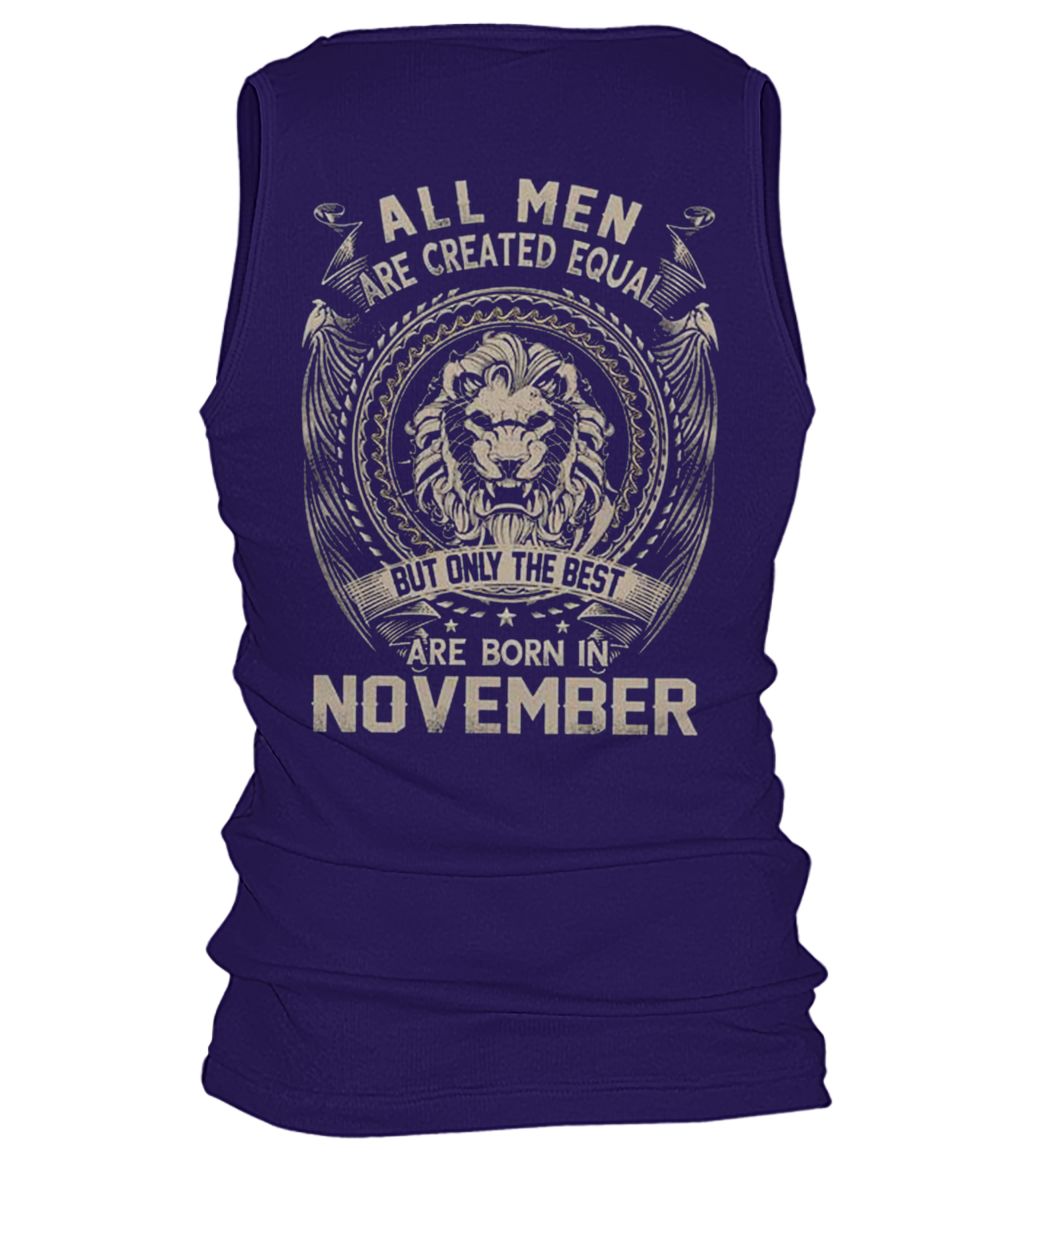 All men created equal but the best are born in november men's tank top